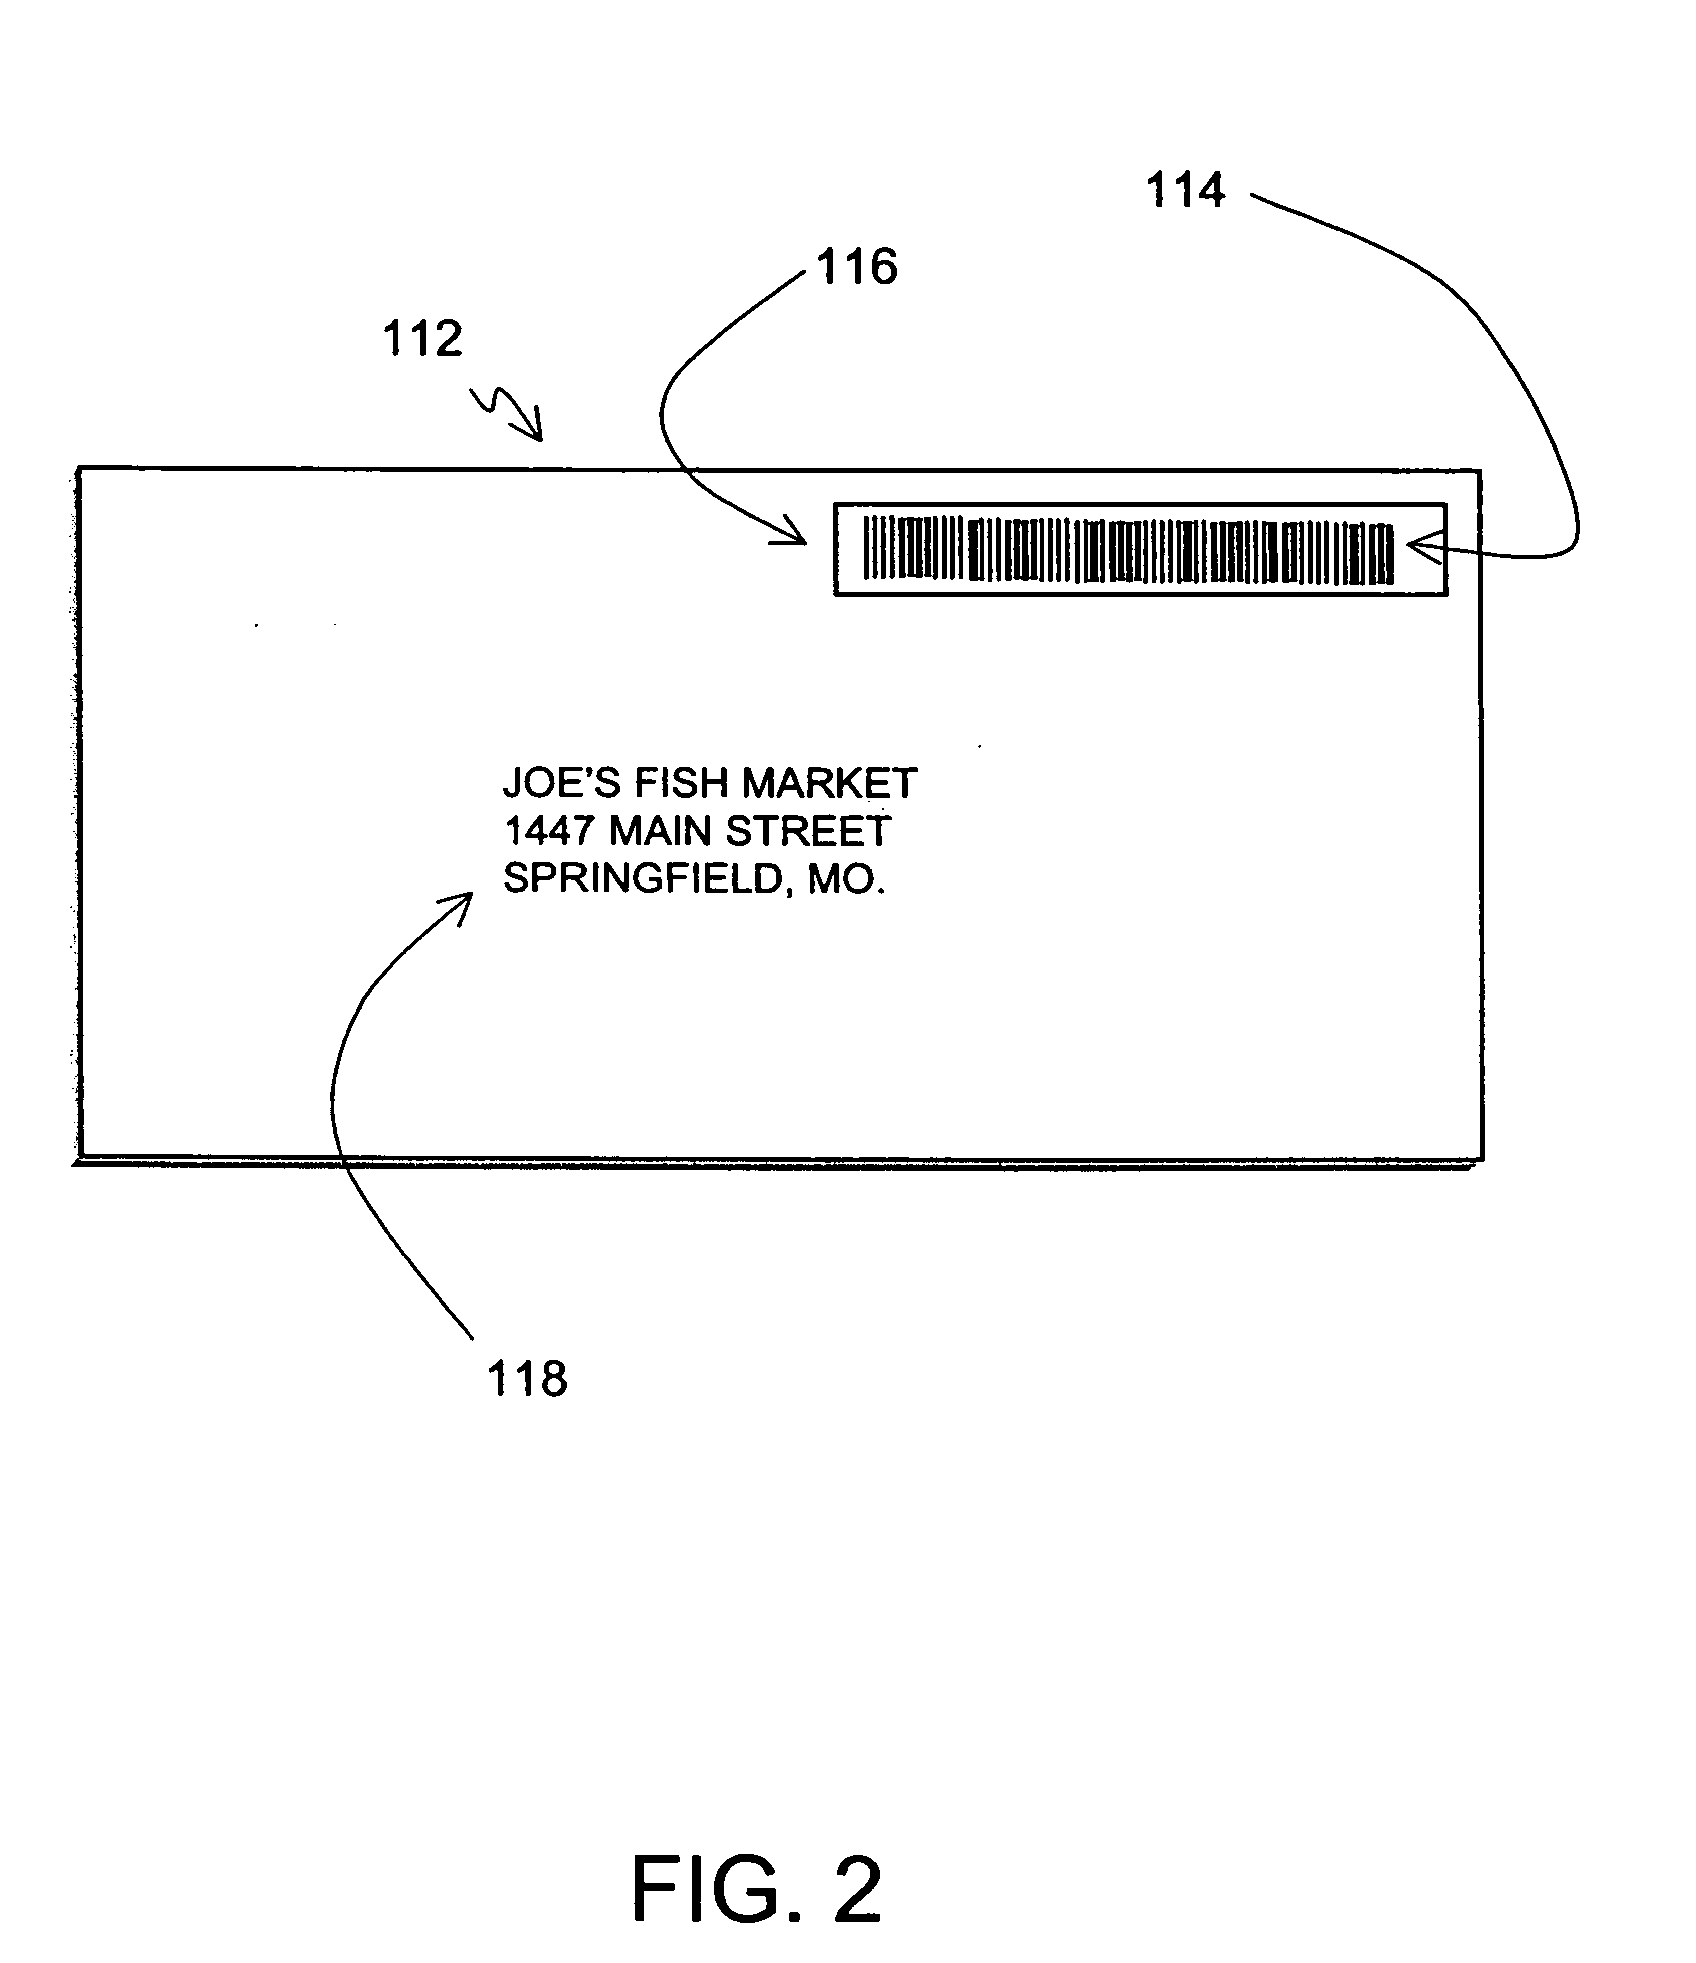 Method and system using delivery trucks to collect address location data